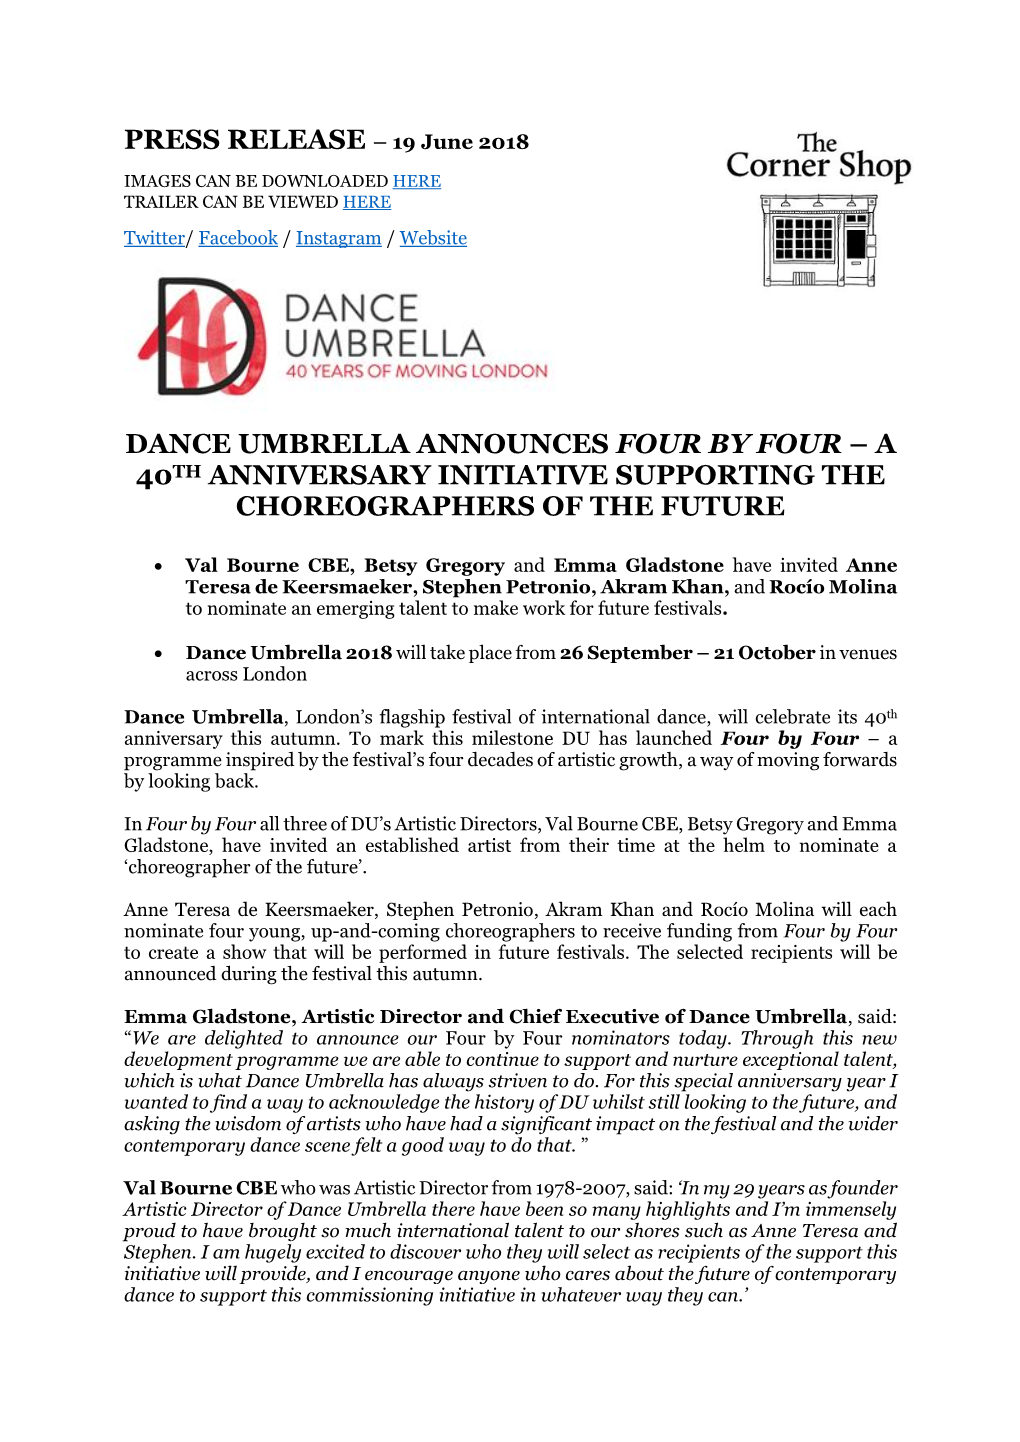 Dance Umbrella Announces Four by Four – a 40Th Anniversary Initiative Supporting the Choreographers of the Future